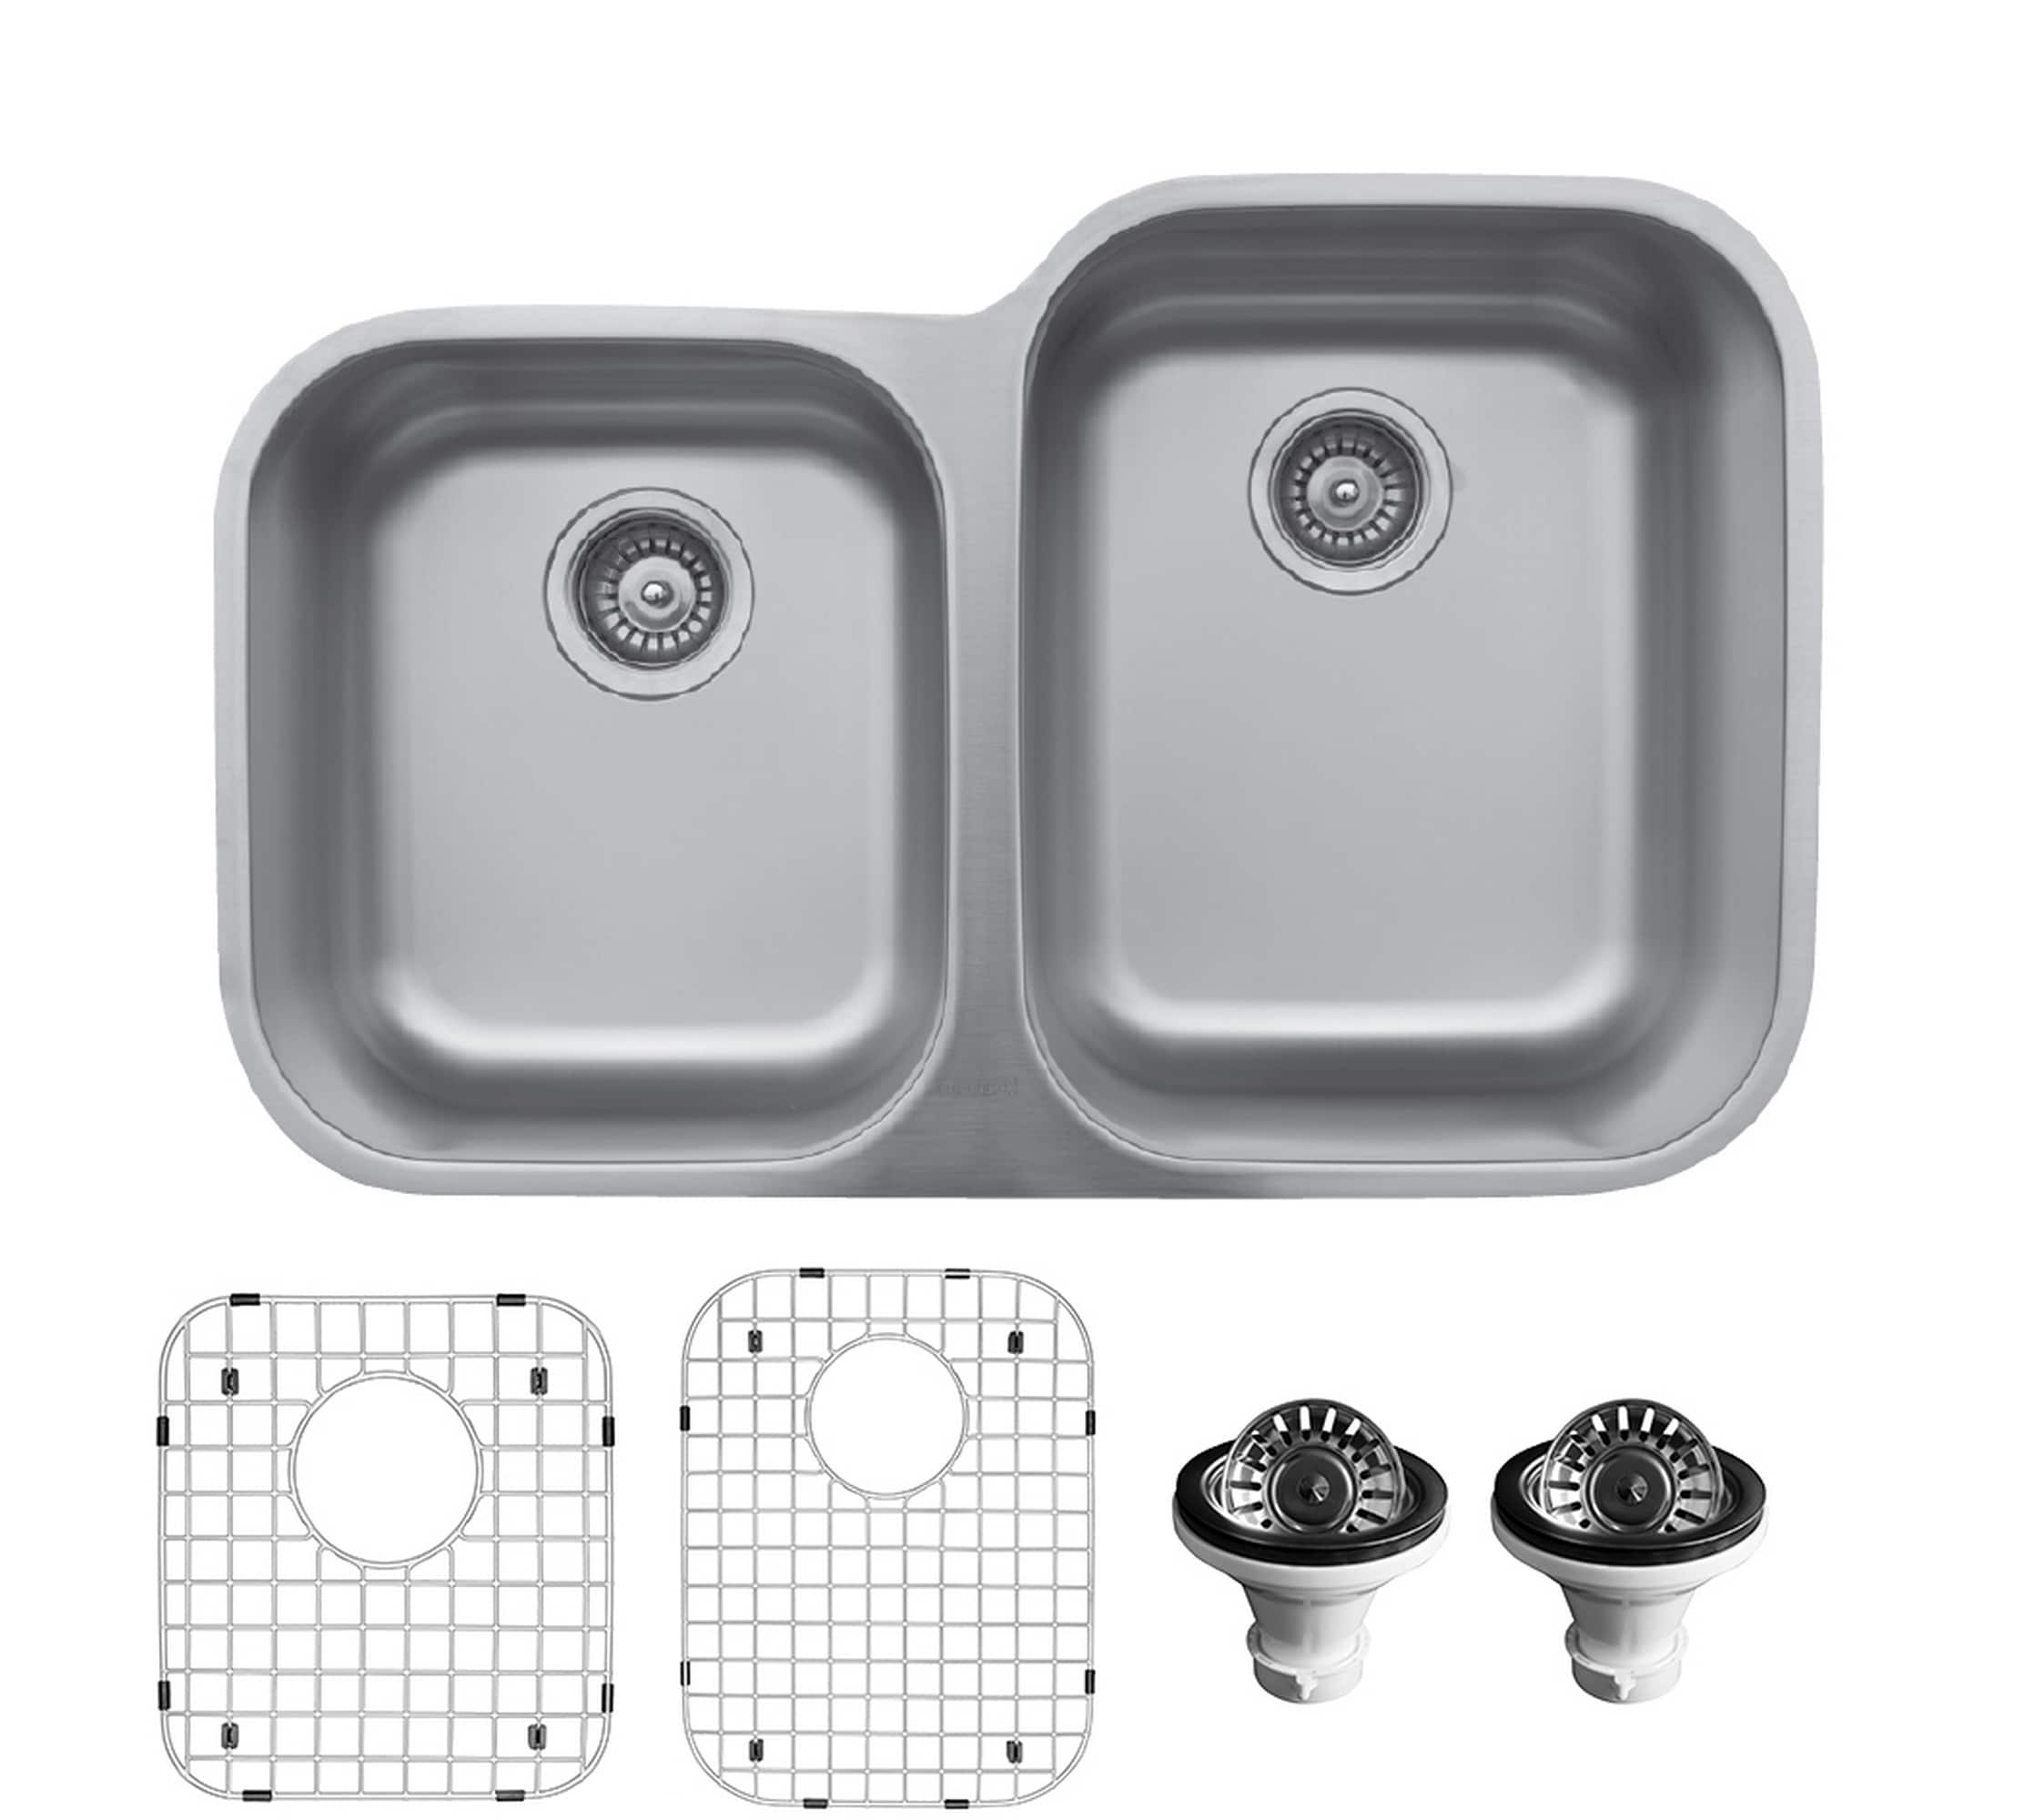 CASAINC 32 in. Undermount Double Bowl 18 Gauge Brushed Stainless Steel Kitchen Sink with Bottom Grid and Basket Strainer